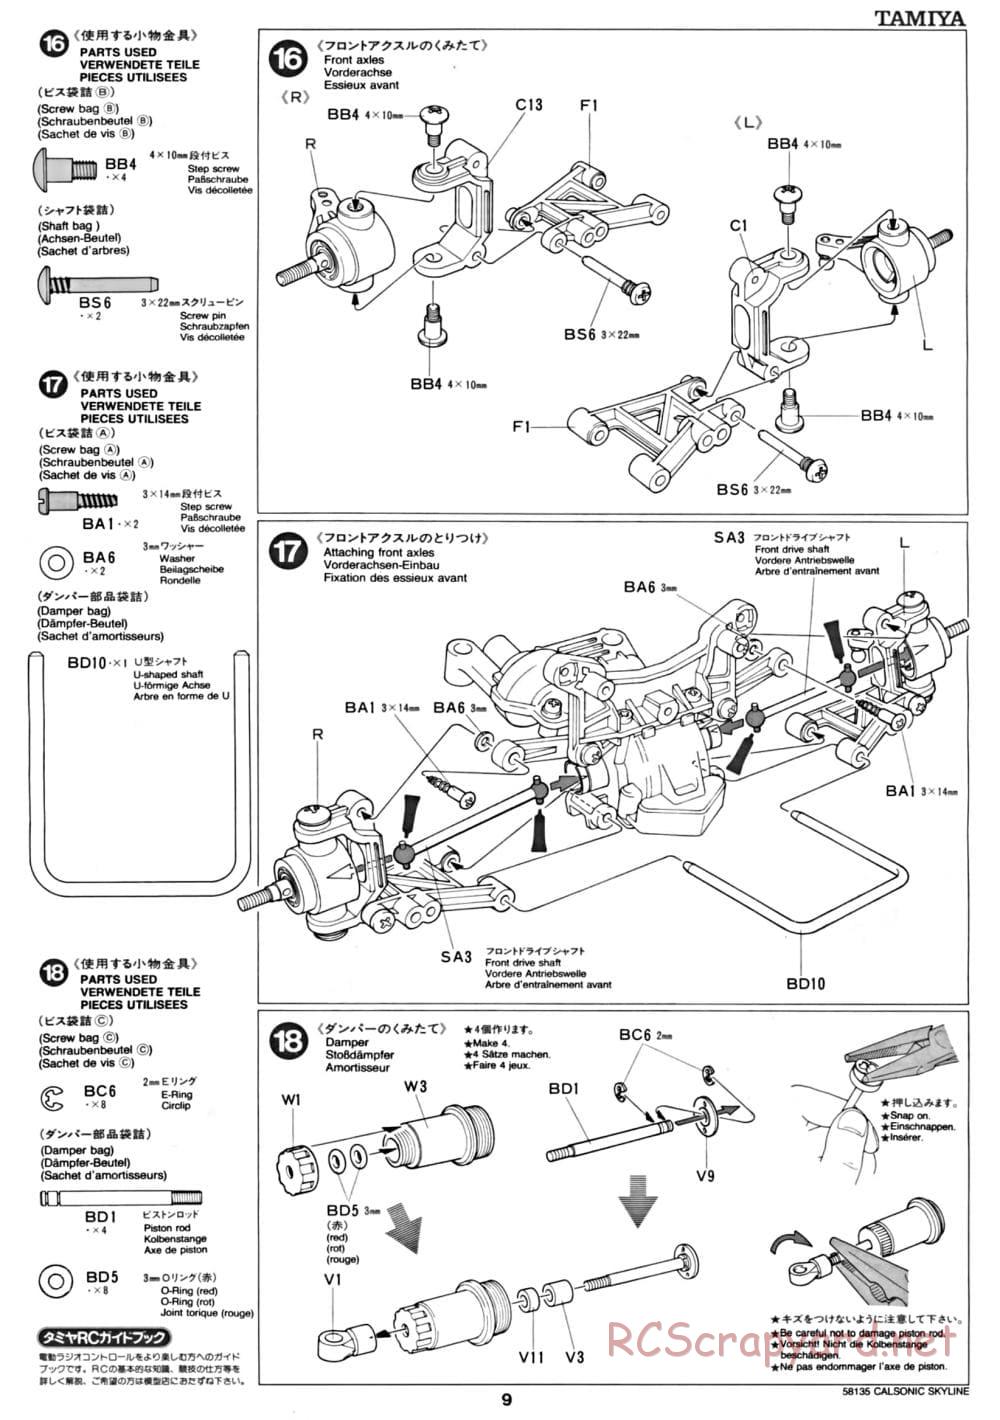 Tamiya - Calsonic Skyline GT-R Gr.A - TA-02 Chassis - Manual - Page 9